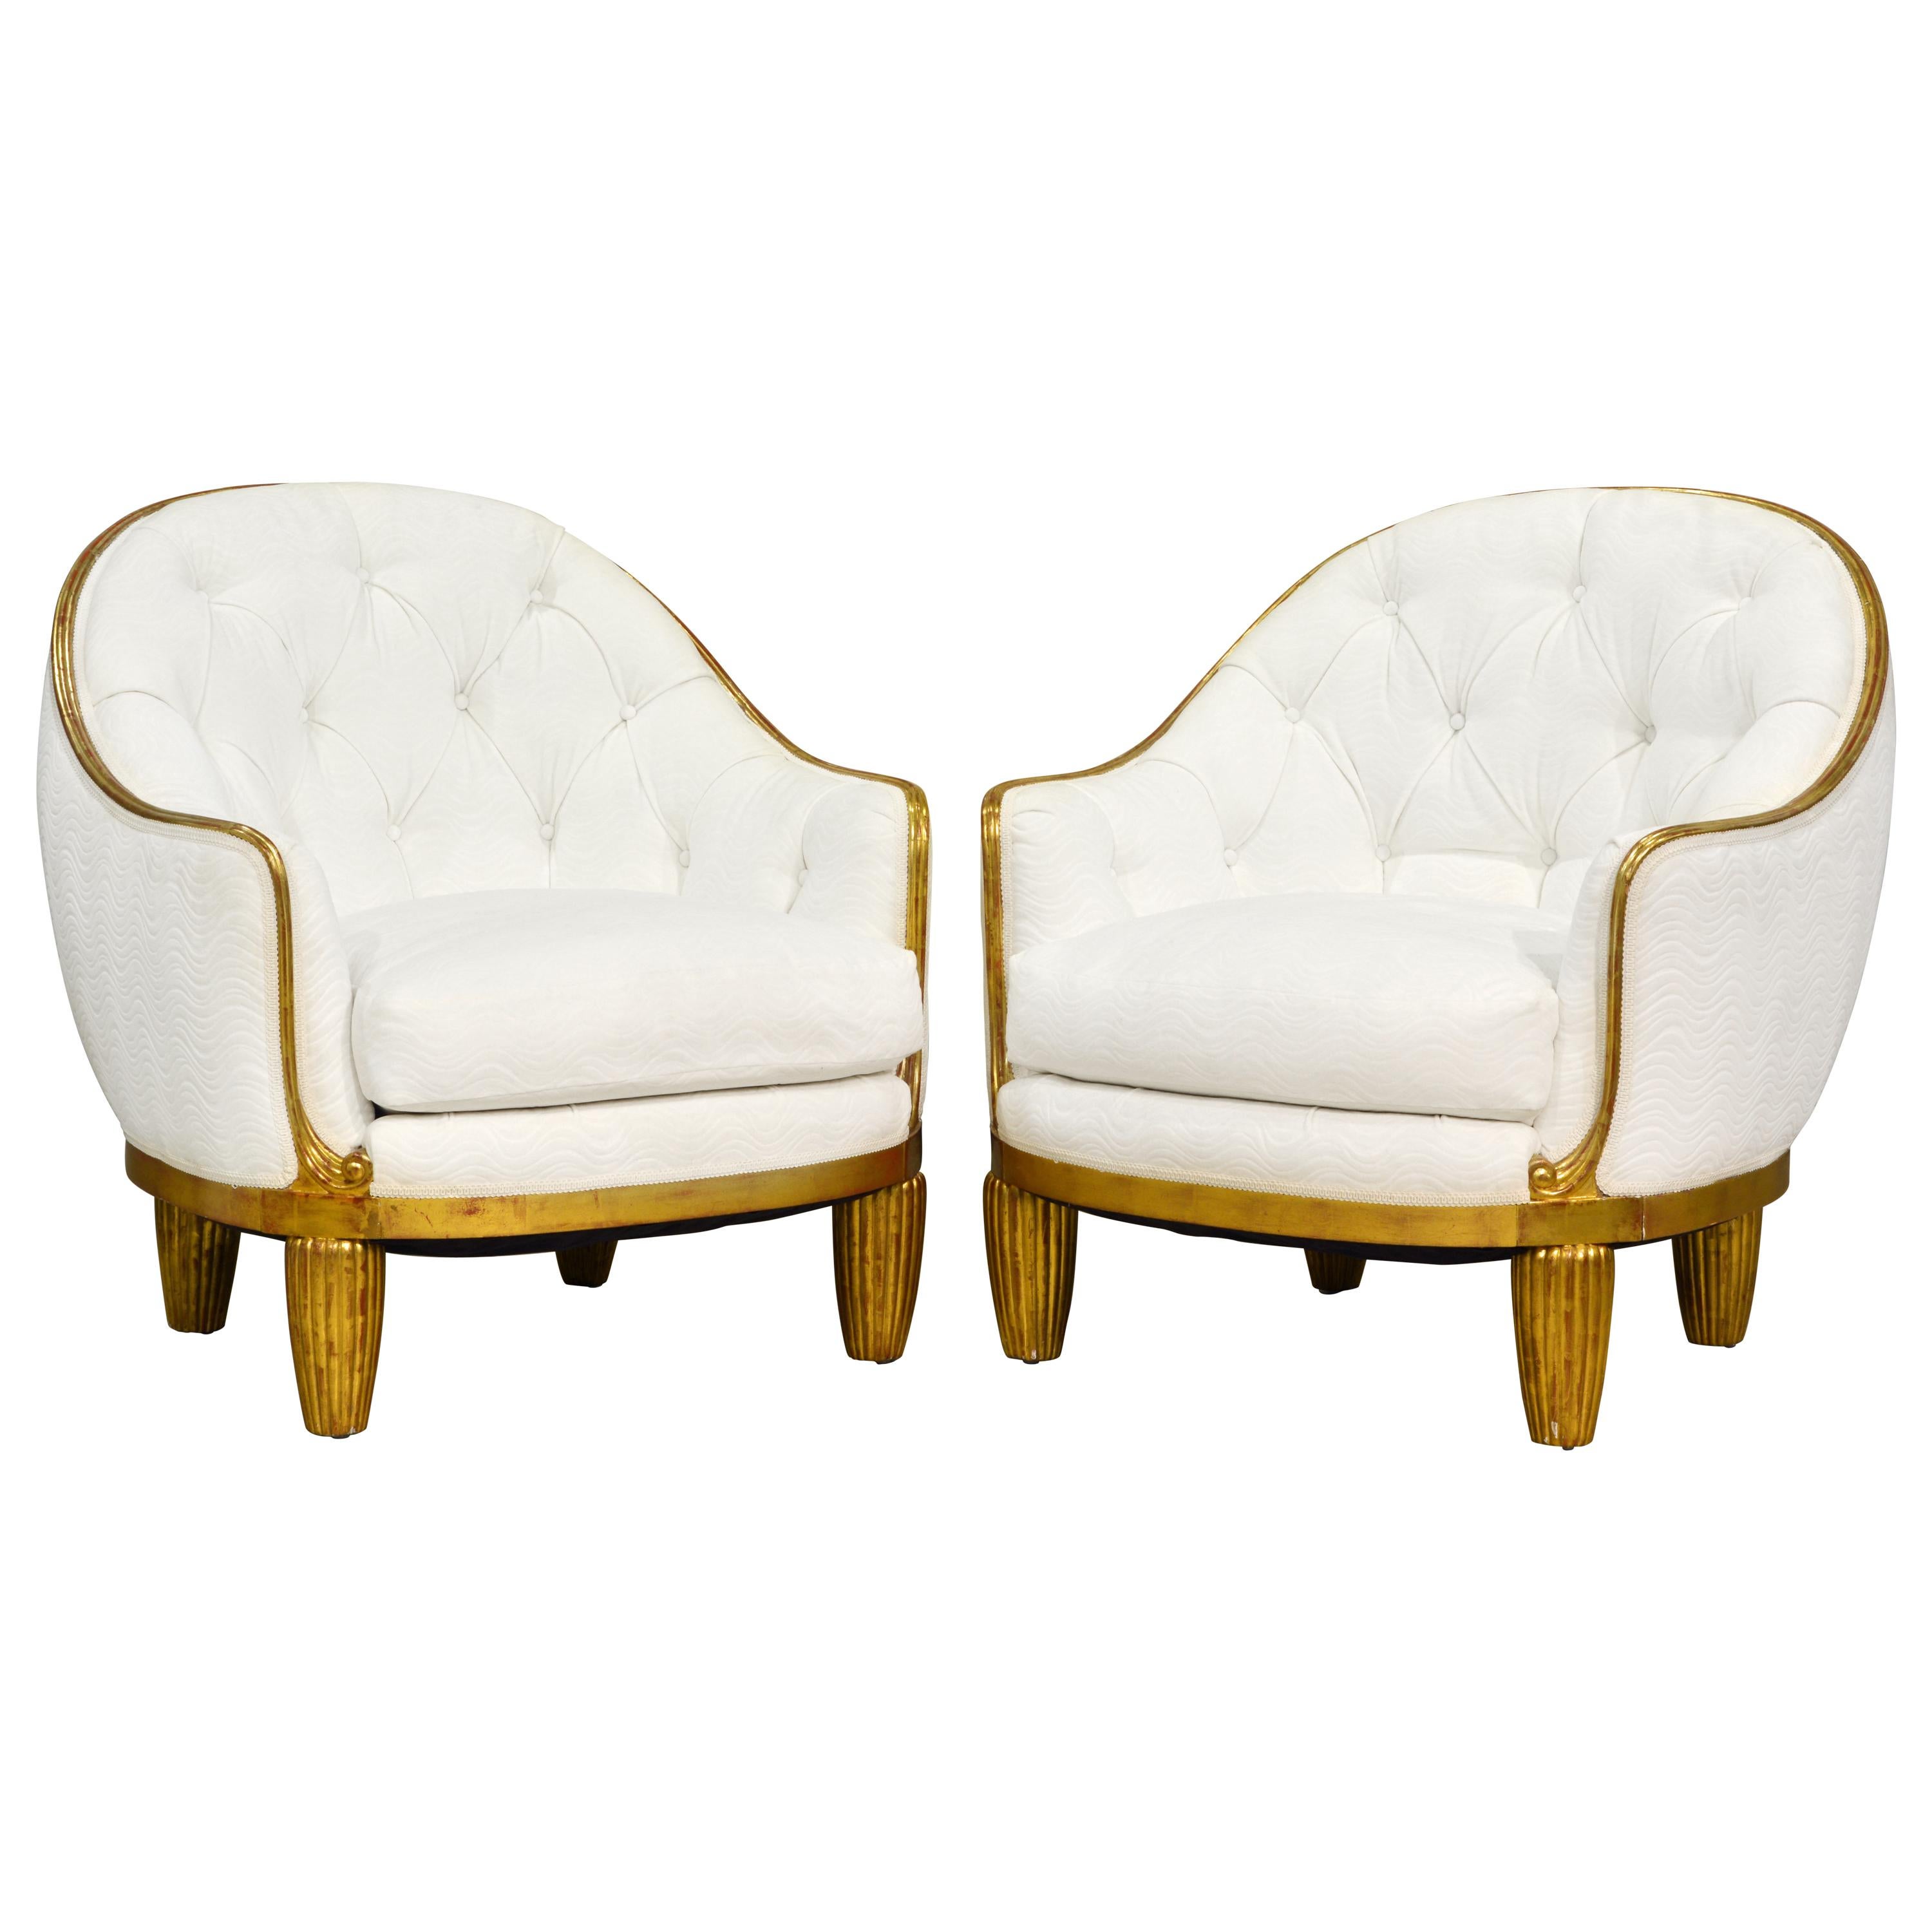 Exceptional Pair of French Art Deco Lounge Chairs Manner of Maurice Dufrene